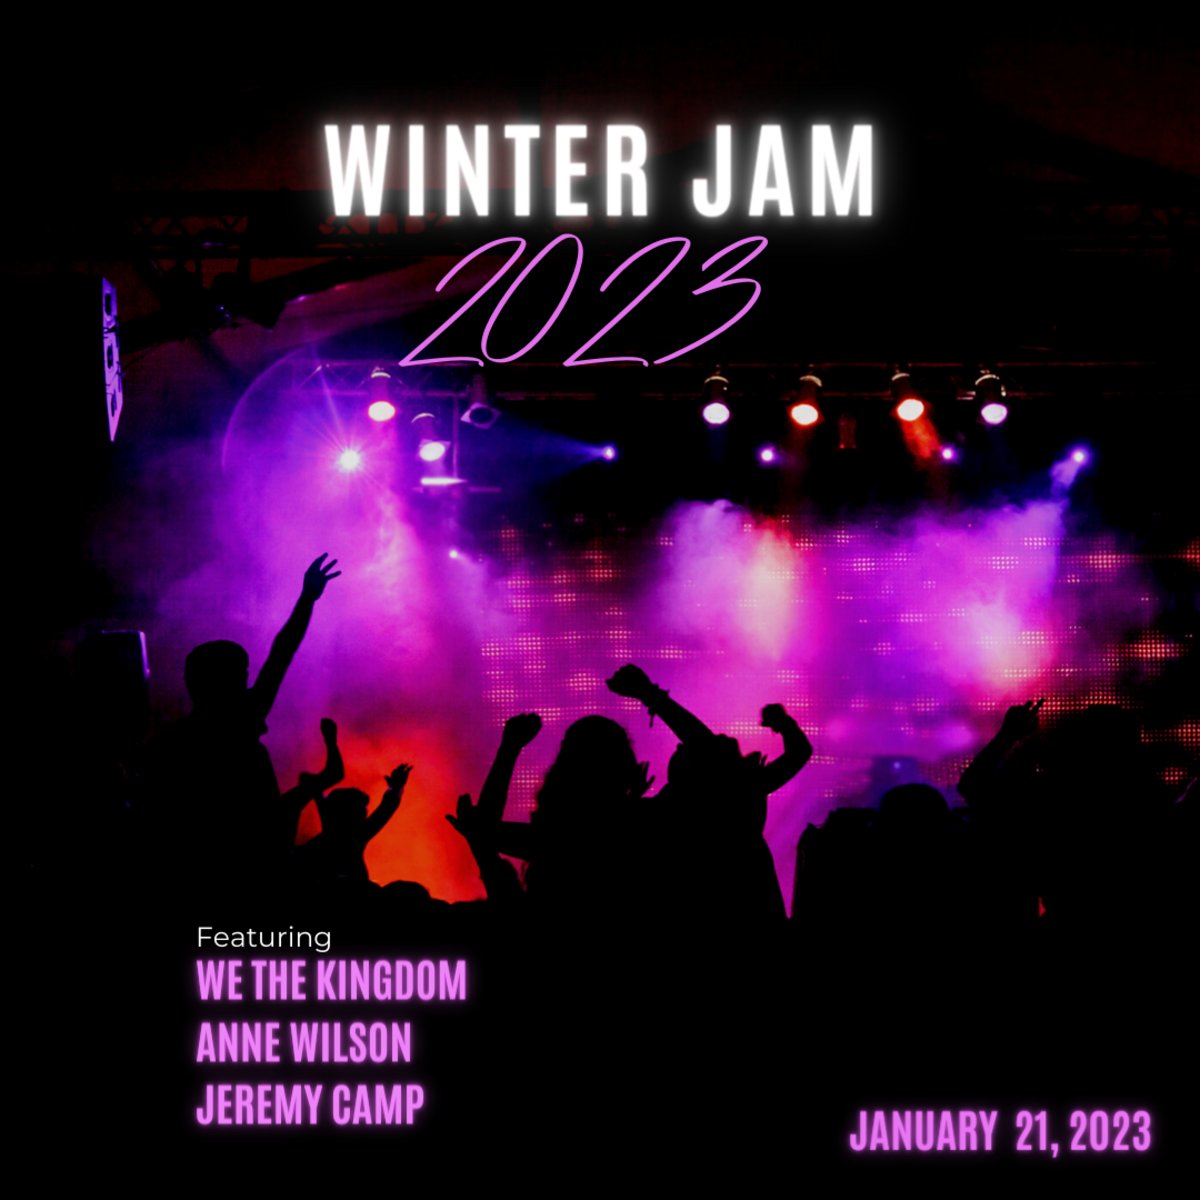 #WinterJam2023 is coming to #Knoxville on January 21! Do you have your rooms booked yet?? We're offering special #discounts for attendees. Call Noni Bakshi at 423-930-5943 or email her at noni.bakshi@mgibsonhotels.com for more info.